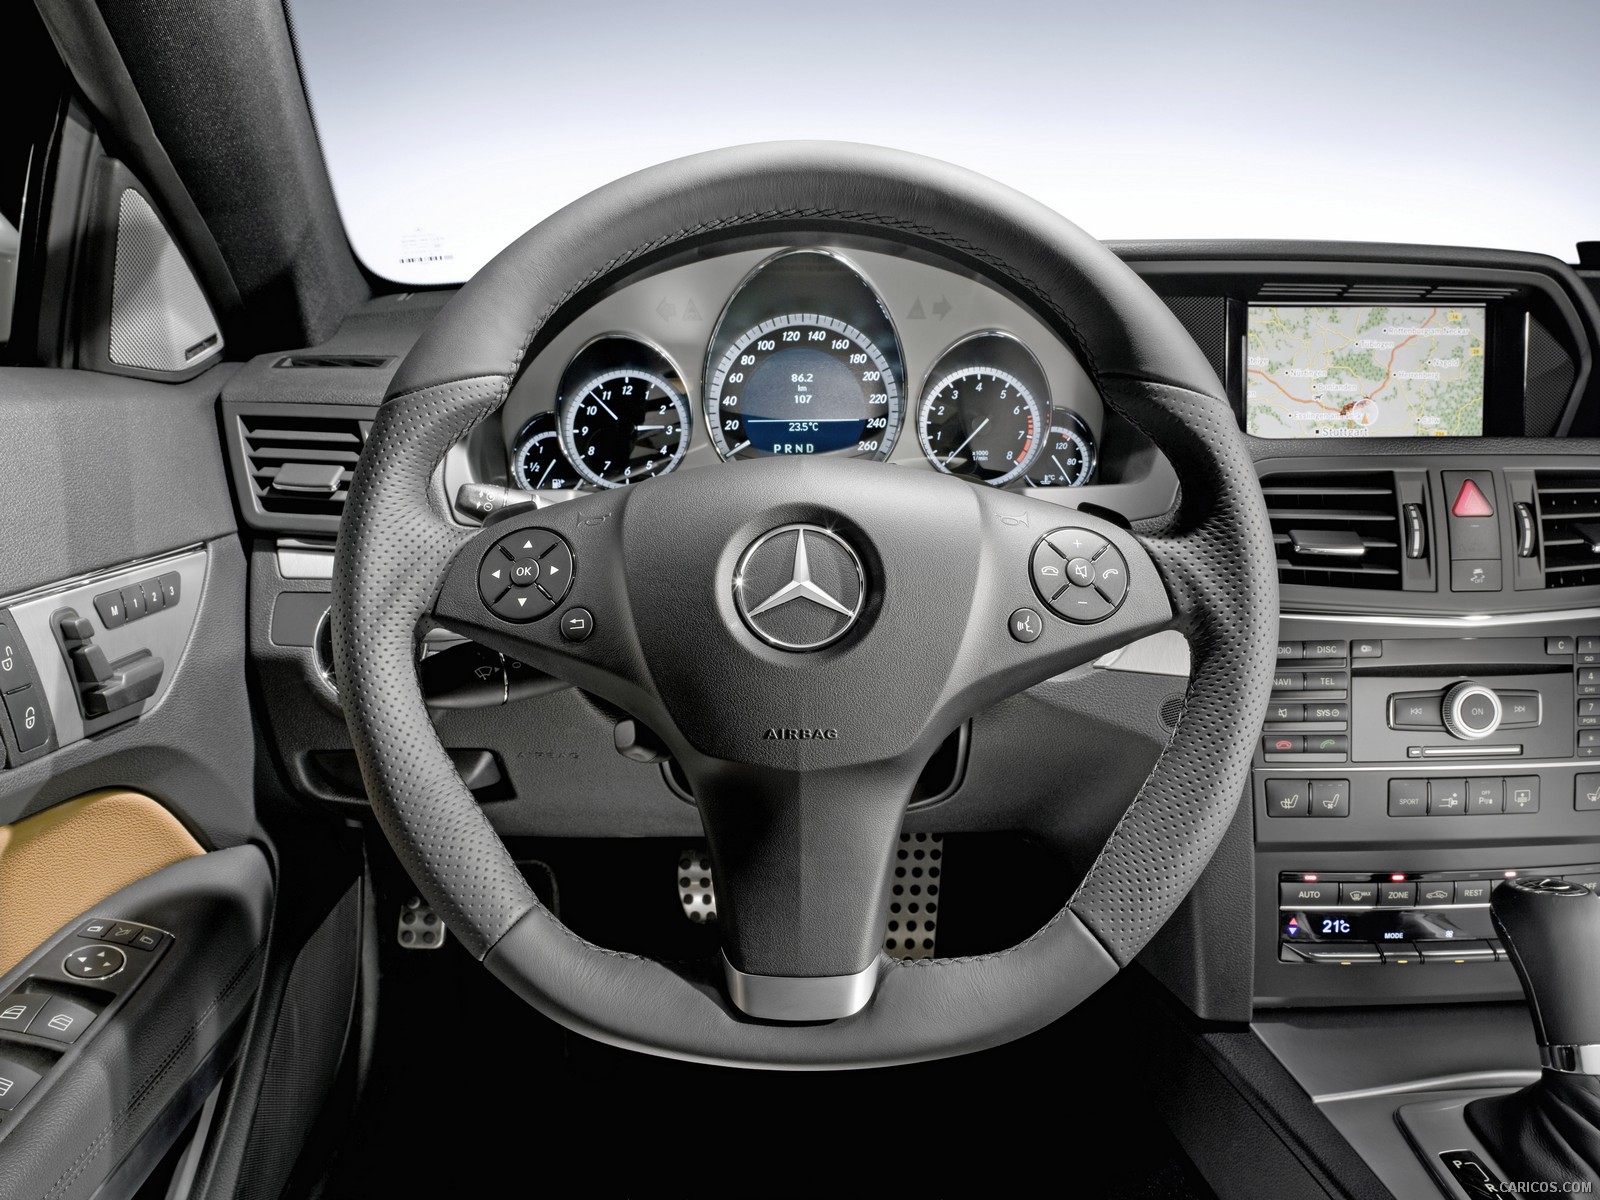 2010 Mercedes-Benz E-Class Coupe  - Interior Steering Wheel View Photo, #139 of 213